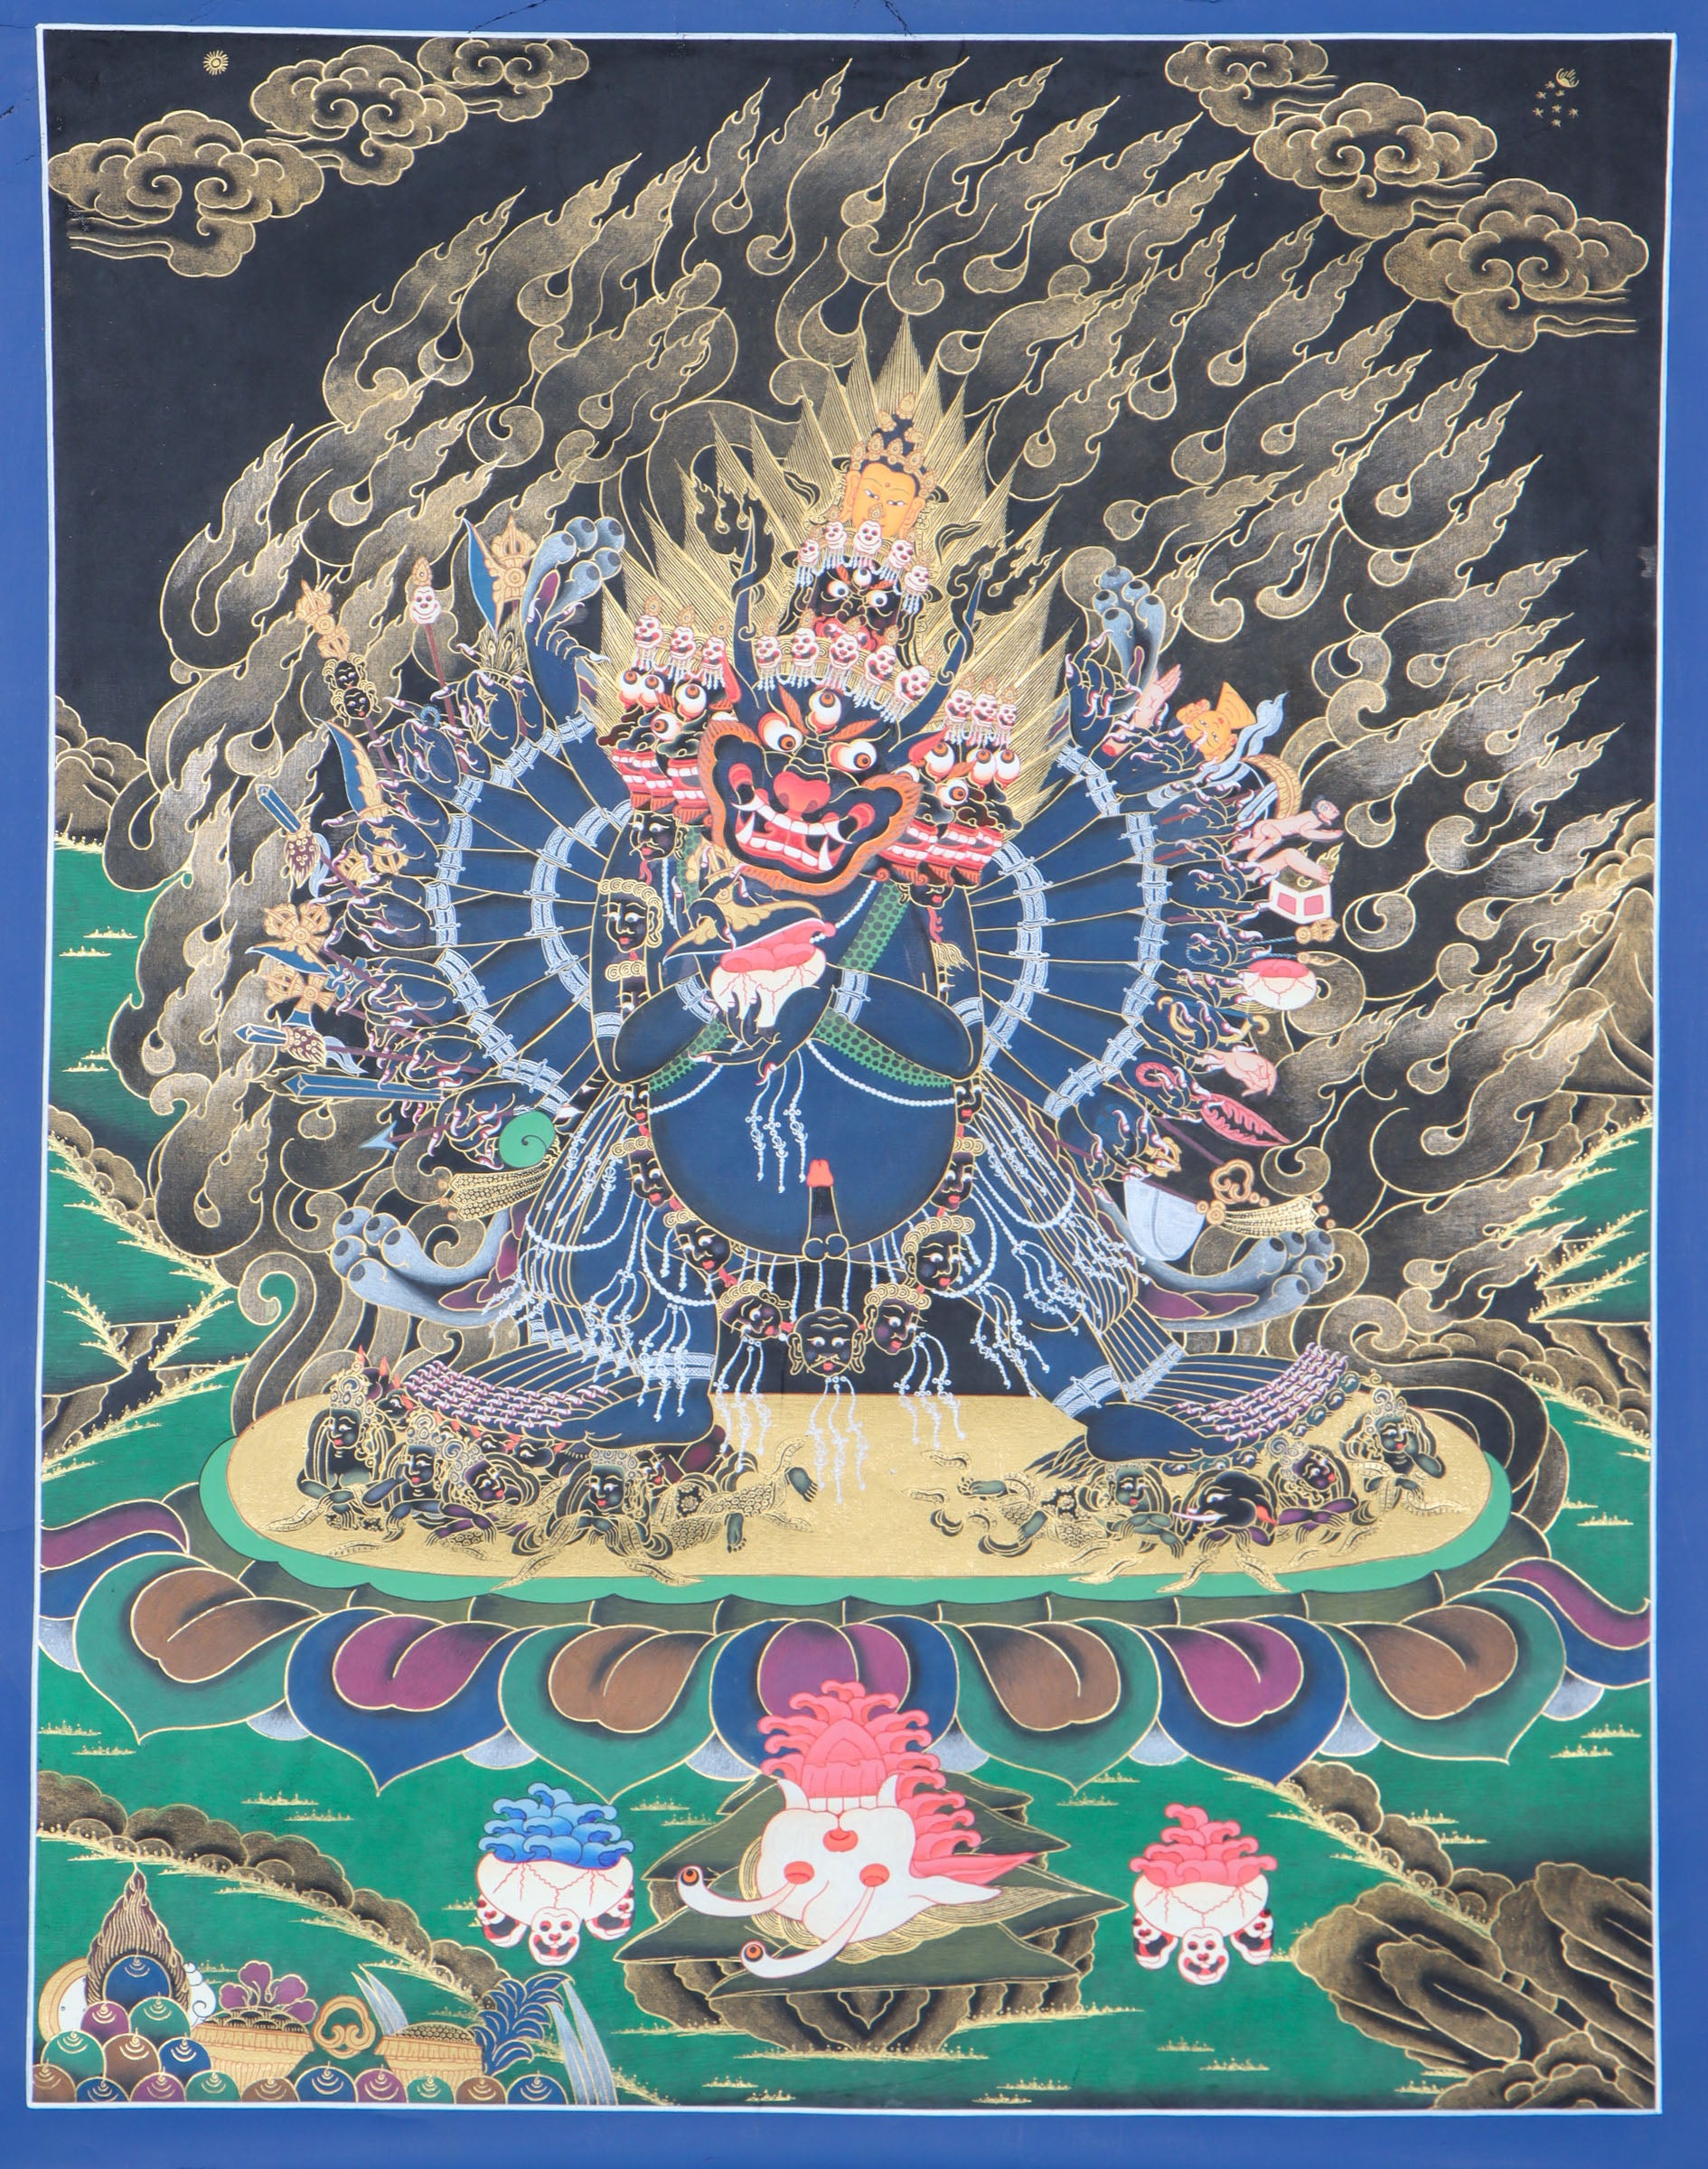 Yamantaka Thangka Painting for ignorance, delusion, and obstacles to enlightenment.